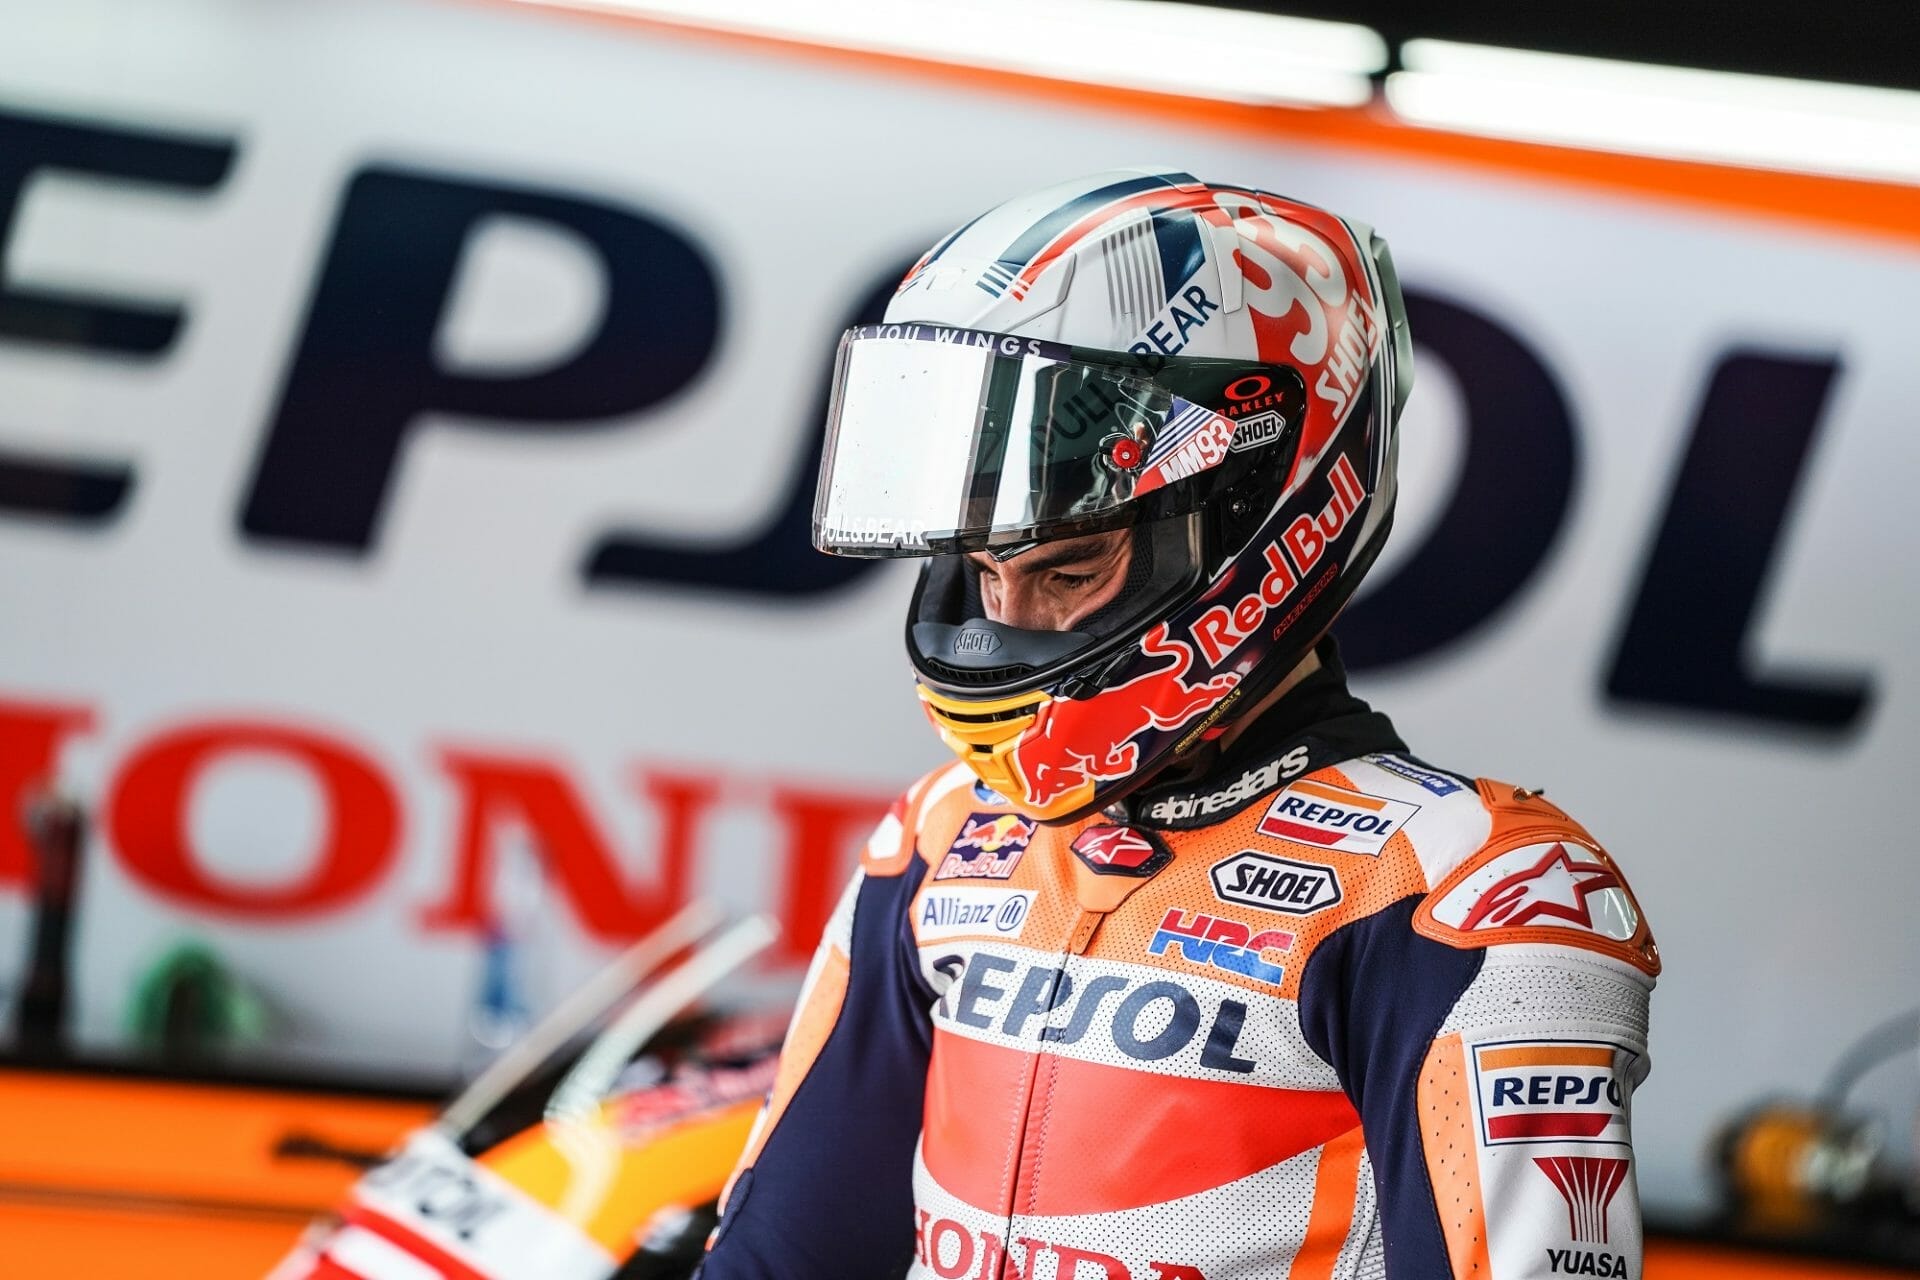 Marc Marquez cancels participation in Assen Racer again suffering from health problems - Motorcycles.News